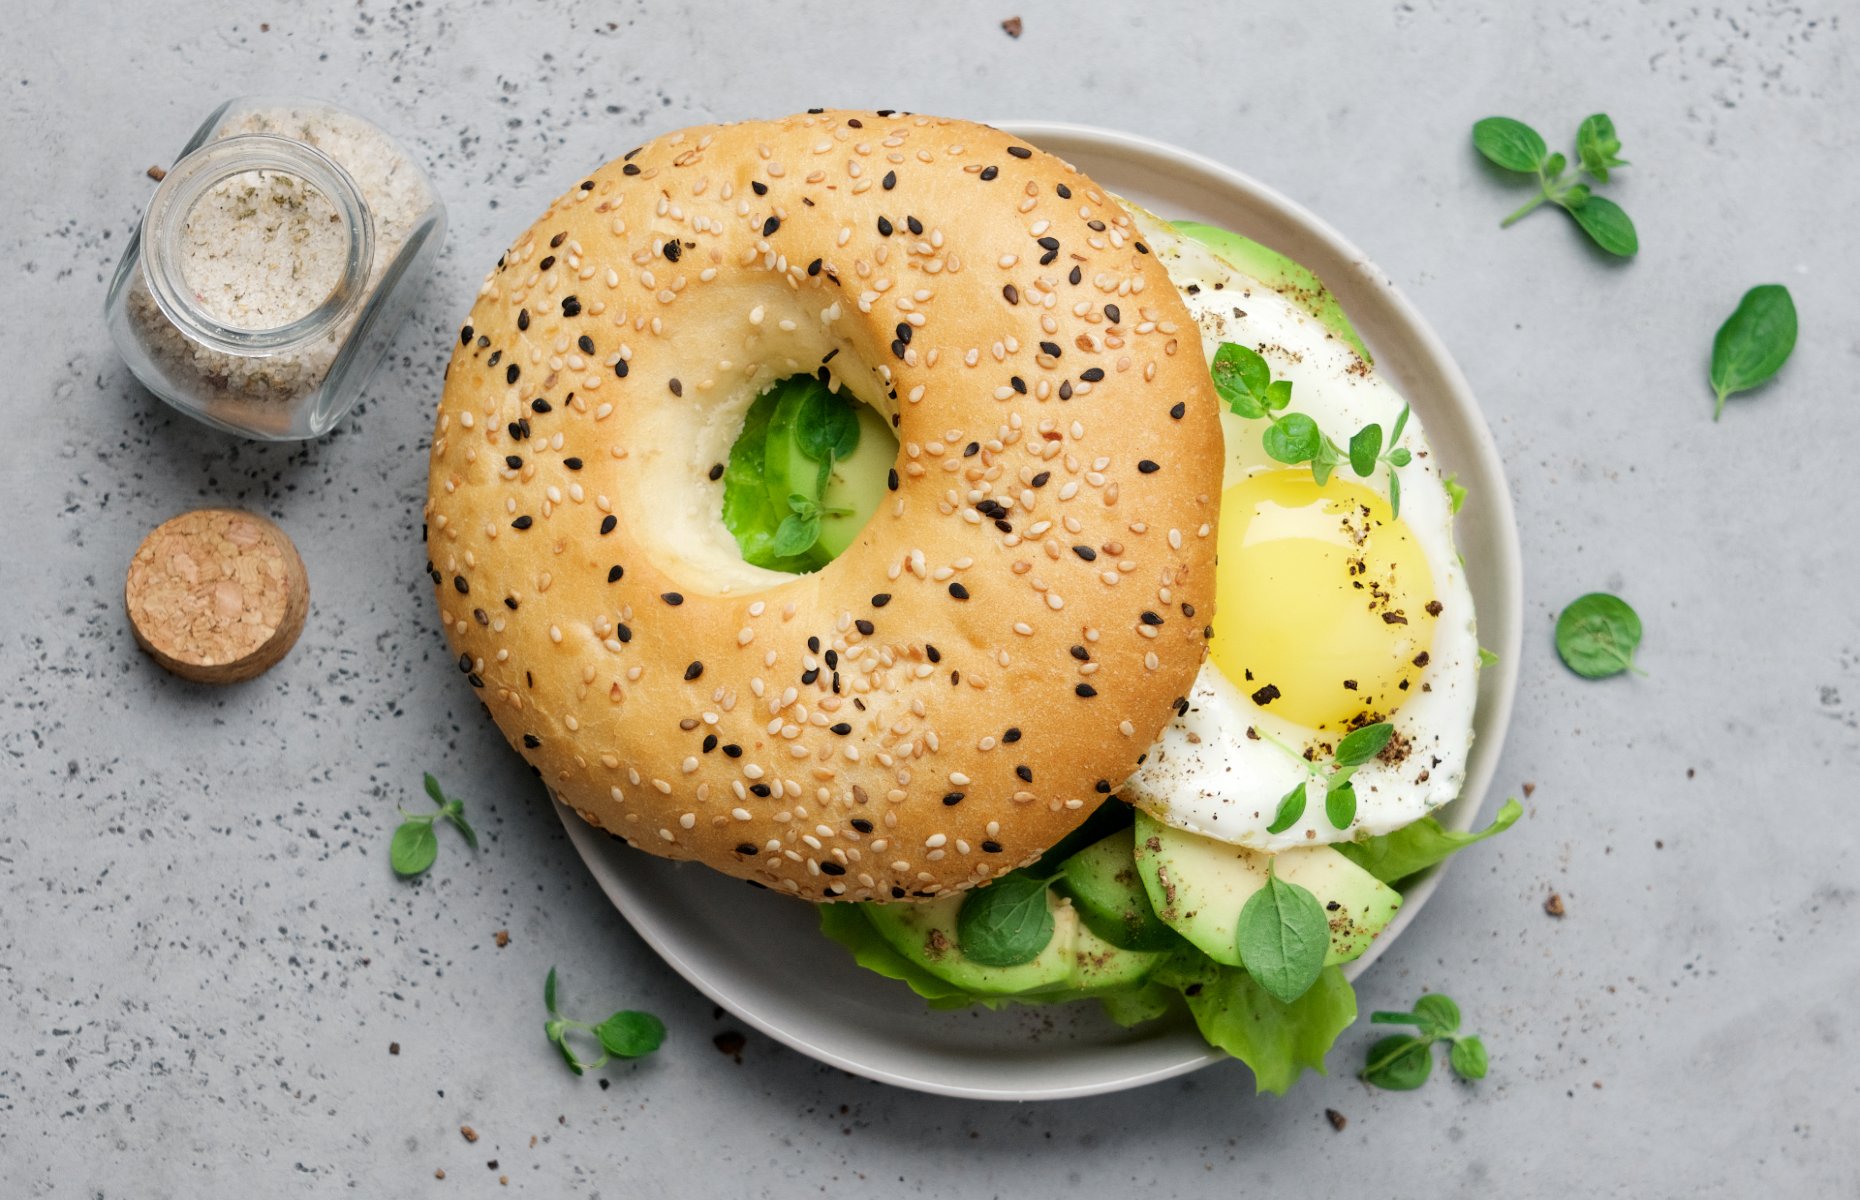 Bagel and eggs for a healthy meal before flying (Image: Anna Puzatykh/Shutterstock)